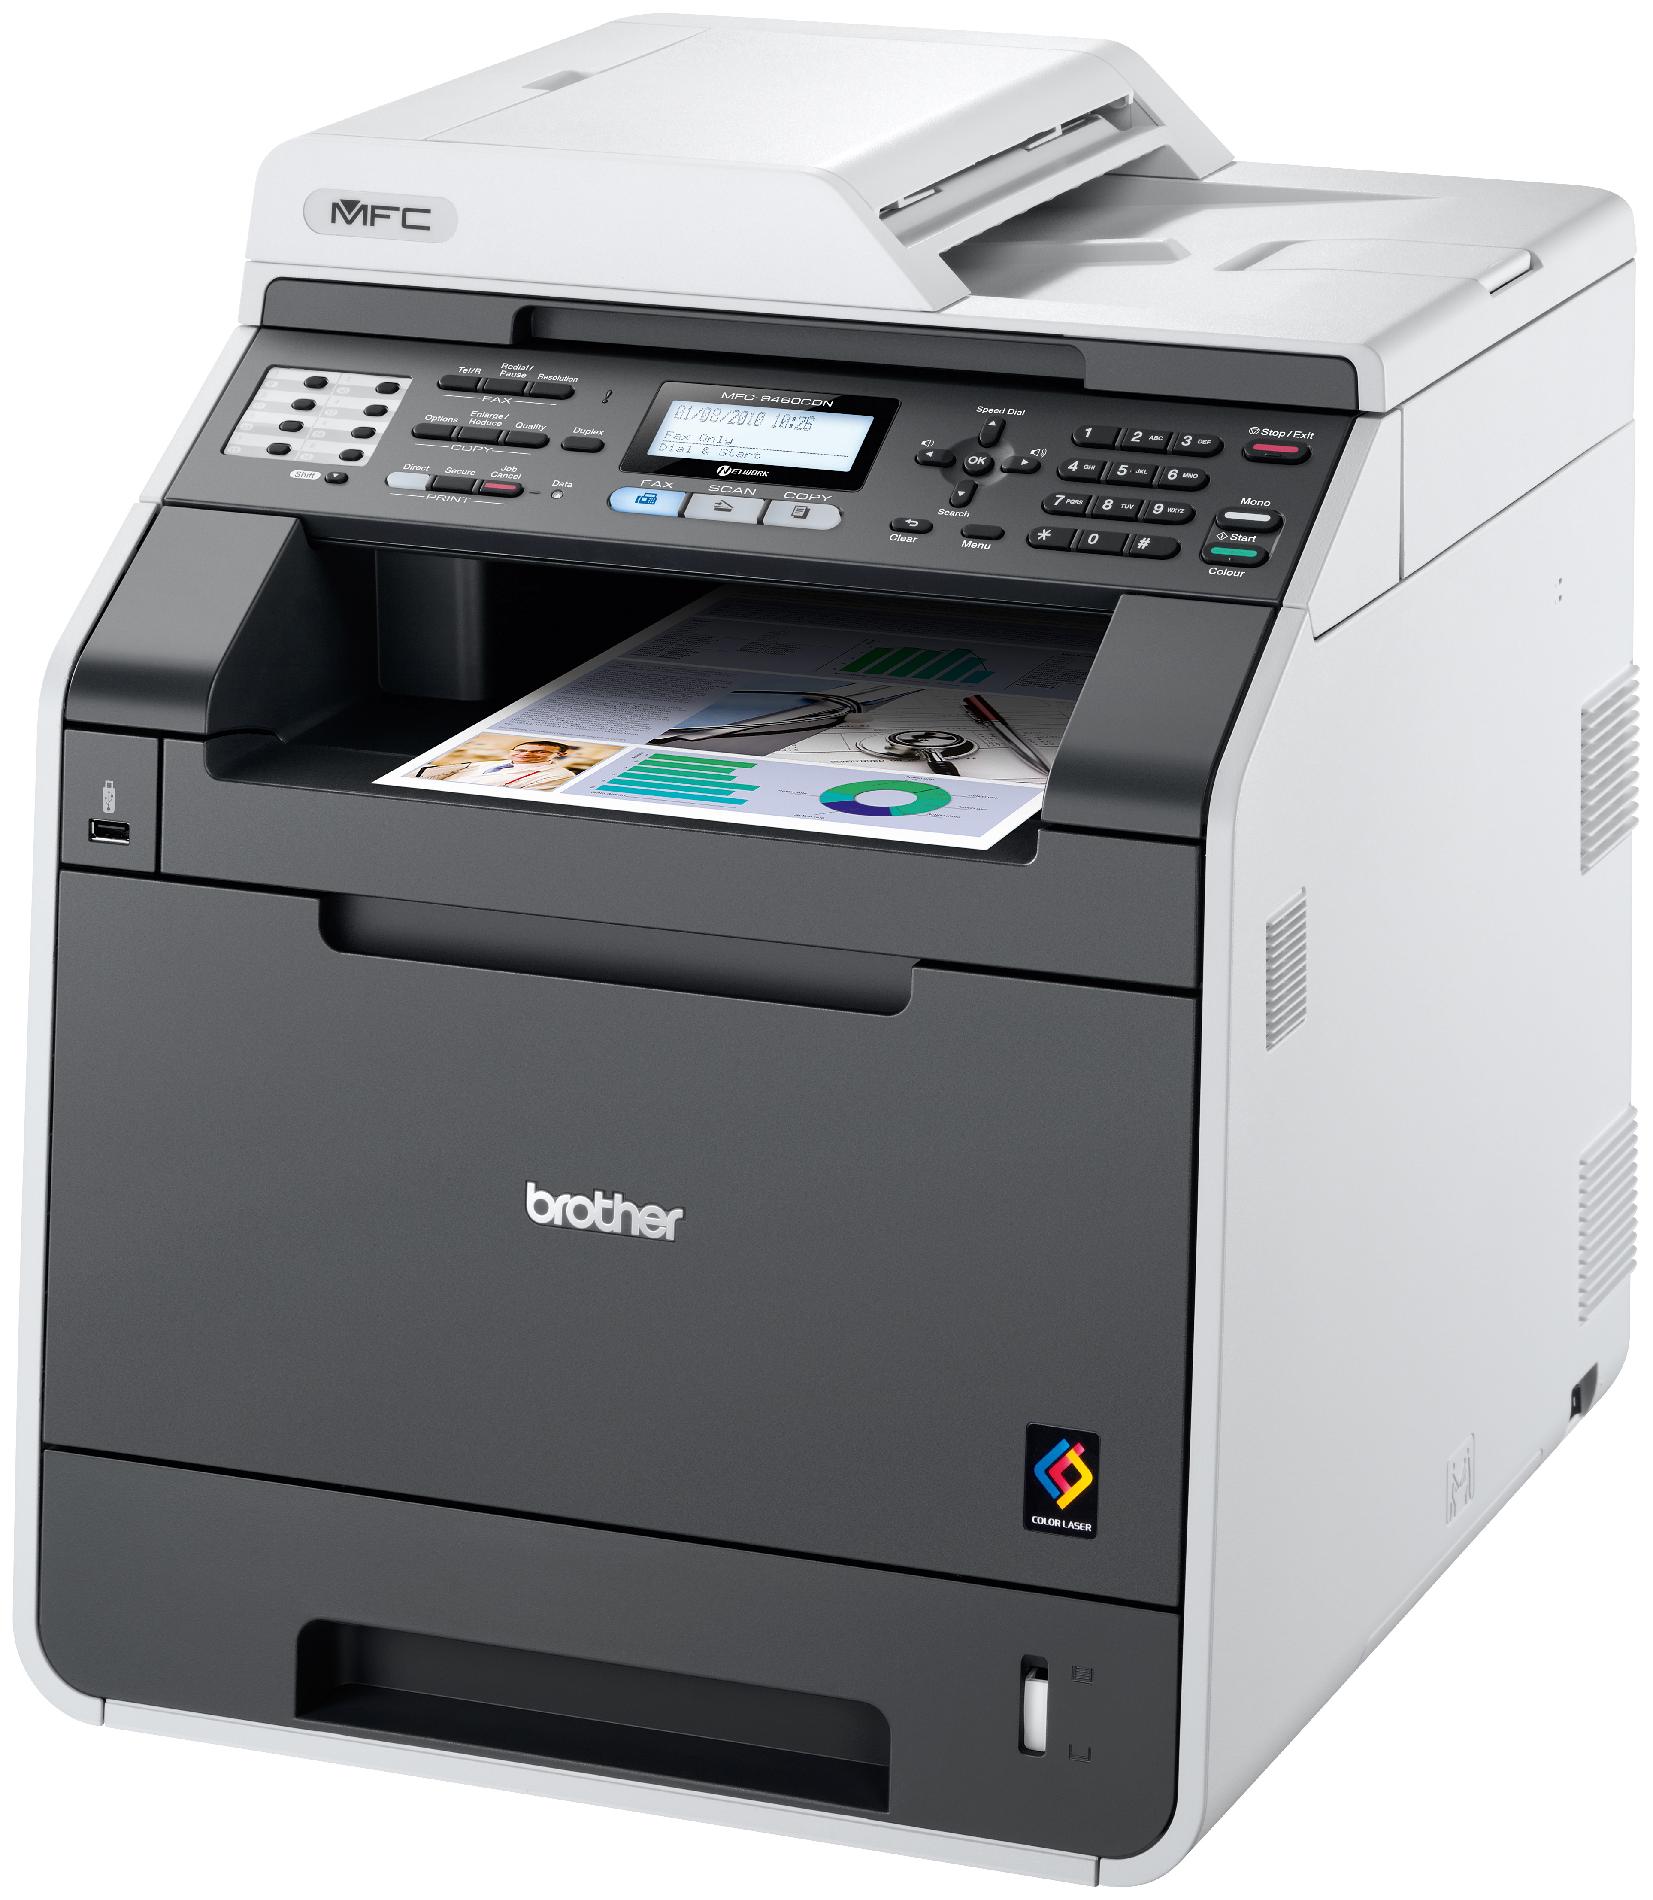 UPC 012502625117 product image for Brother MFC-9460CDN Color Laser All-in-One Printer | upcitemdb.com